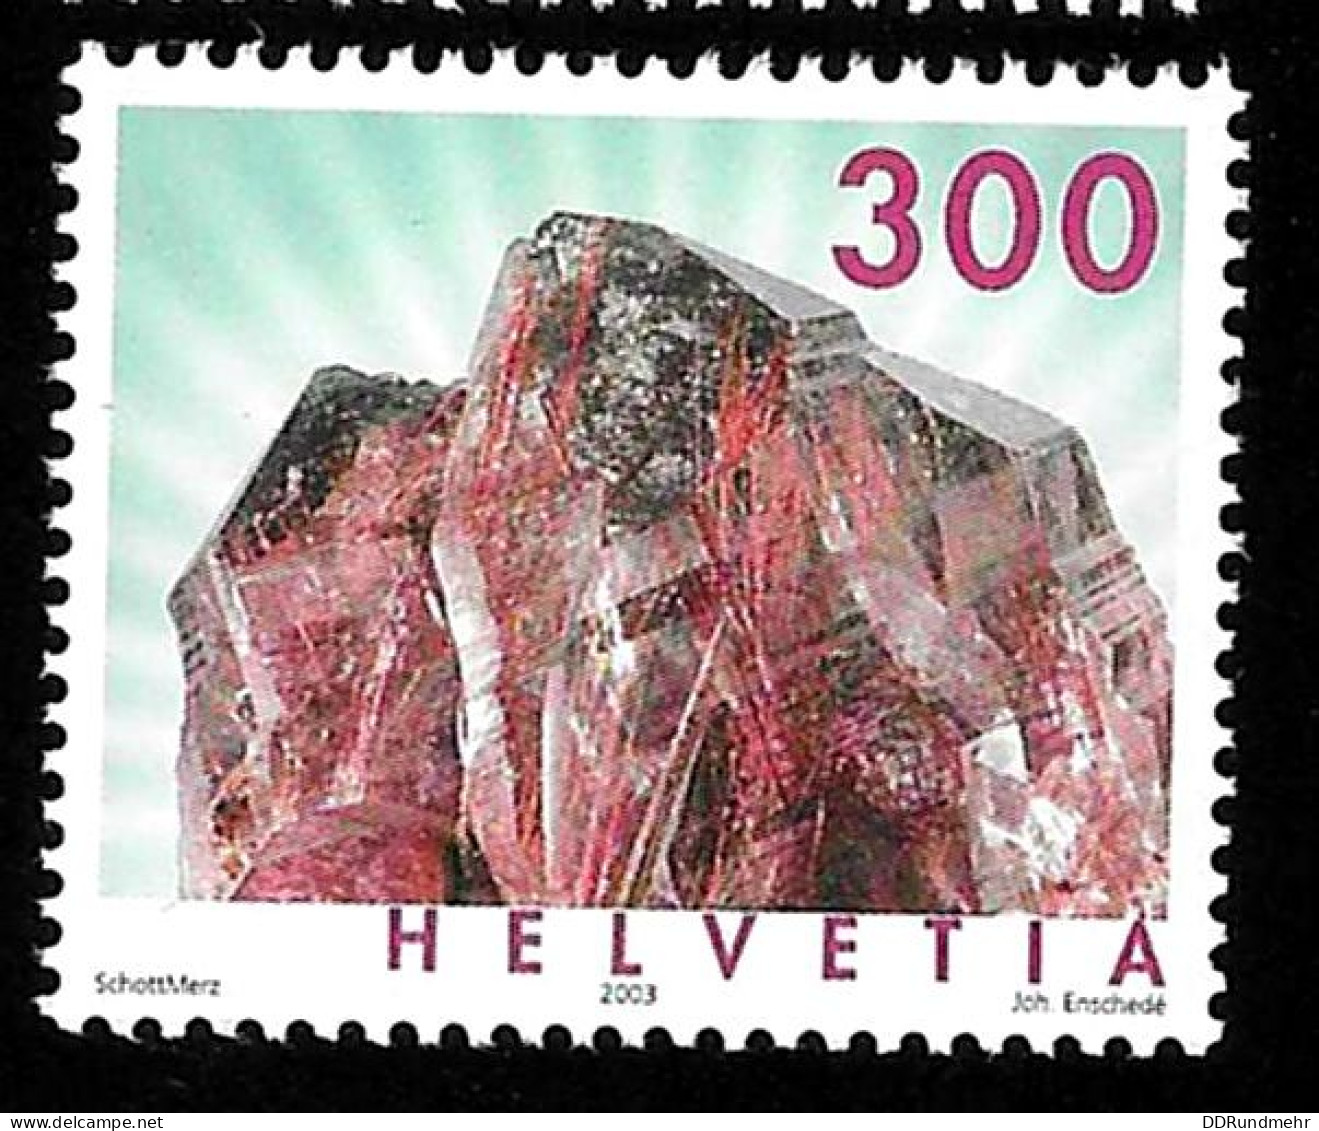 2003 Minerals  Michel CH 1844 Stamp Number CH 1154 Yvert Et Tellier CH 1776 Stanley Gibbons CH 1523 Xx MNH - Unused Stamps